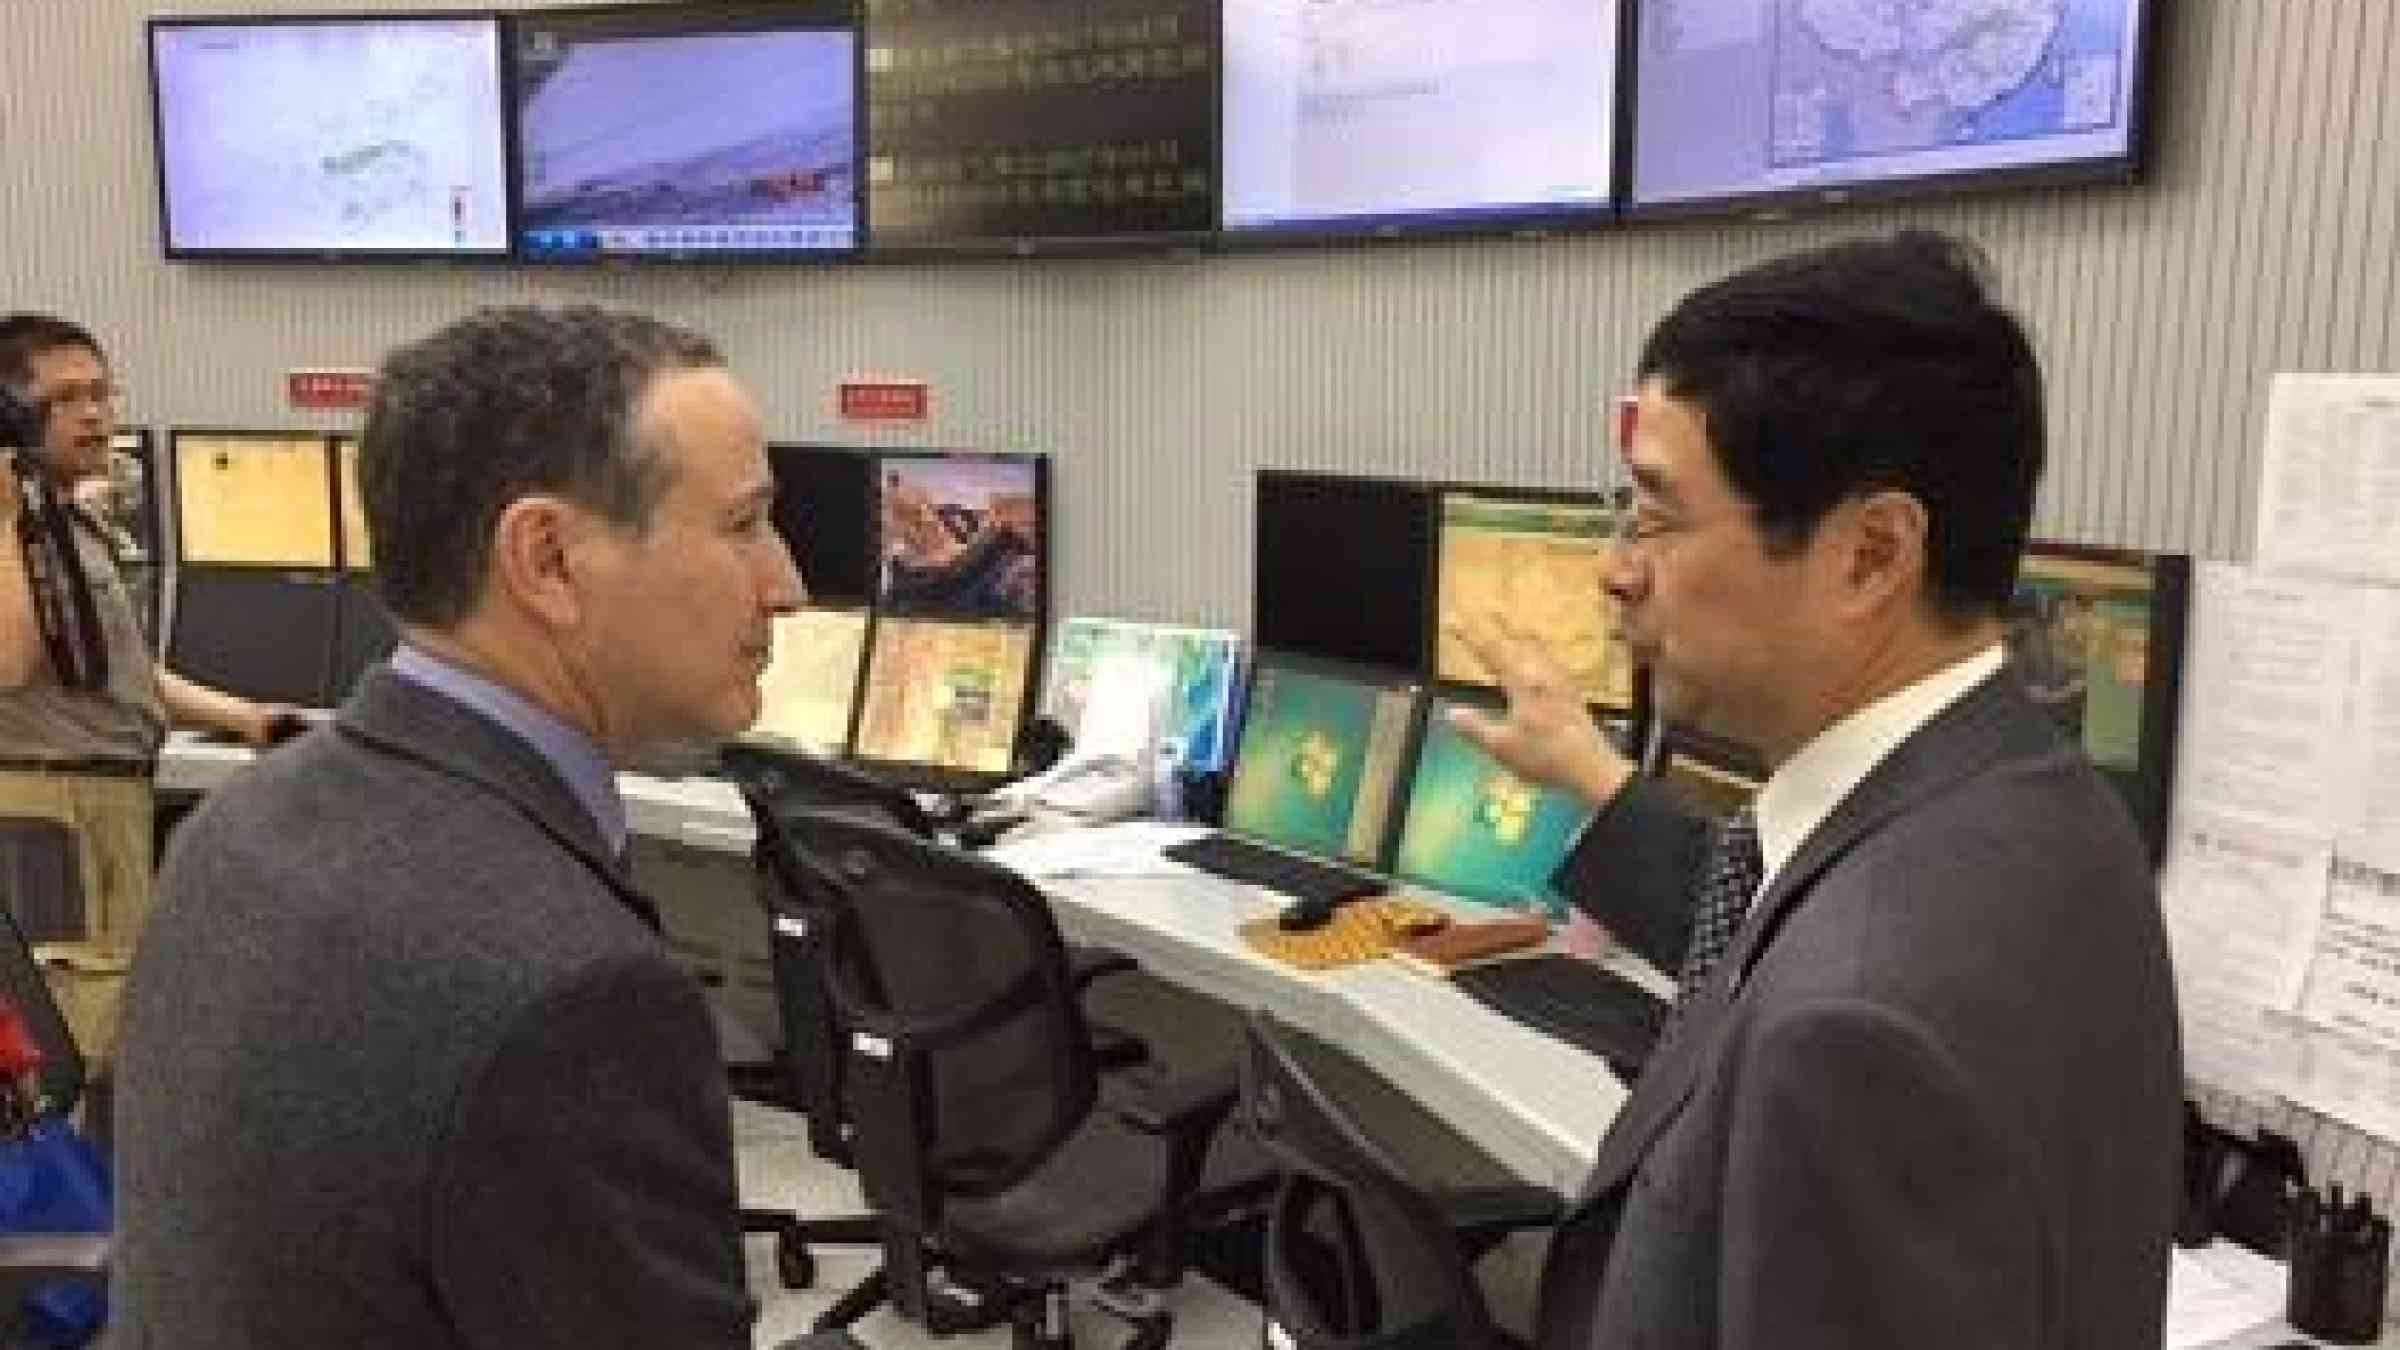 Robert Glasser, Special Representative of the Secretary-General for Disaster Risk Reduction (left), listens as Mr. Shen Xiaonong, Deputy Director of the China Meteorological Administration, explains his institution's operations (Photo: UNISDR)